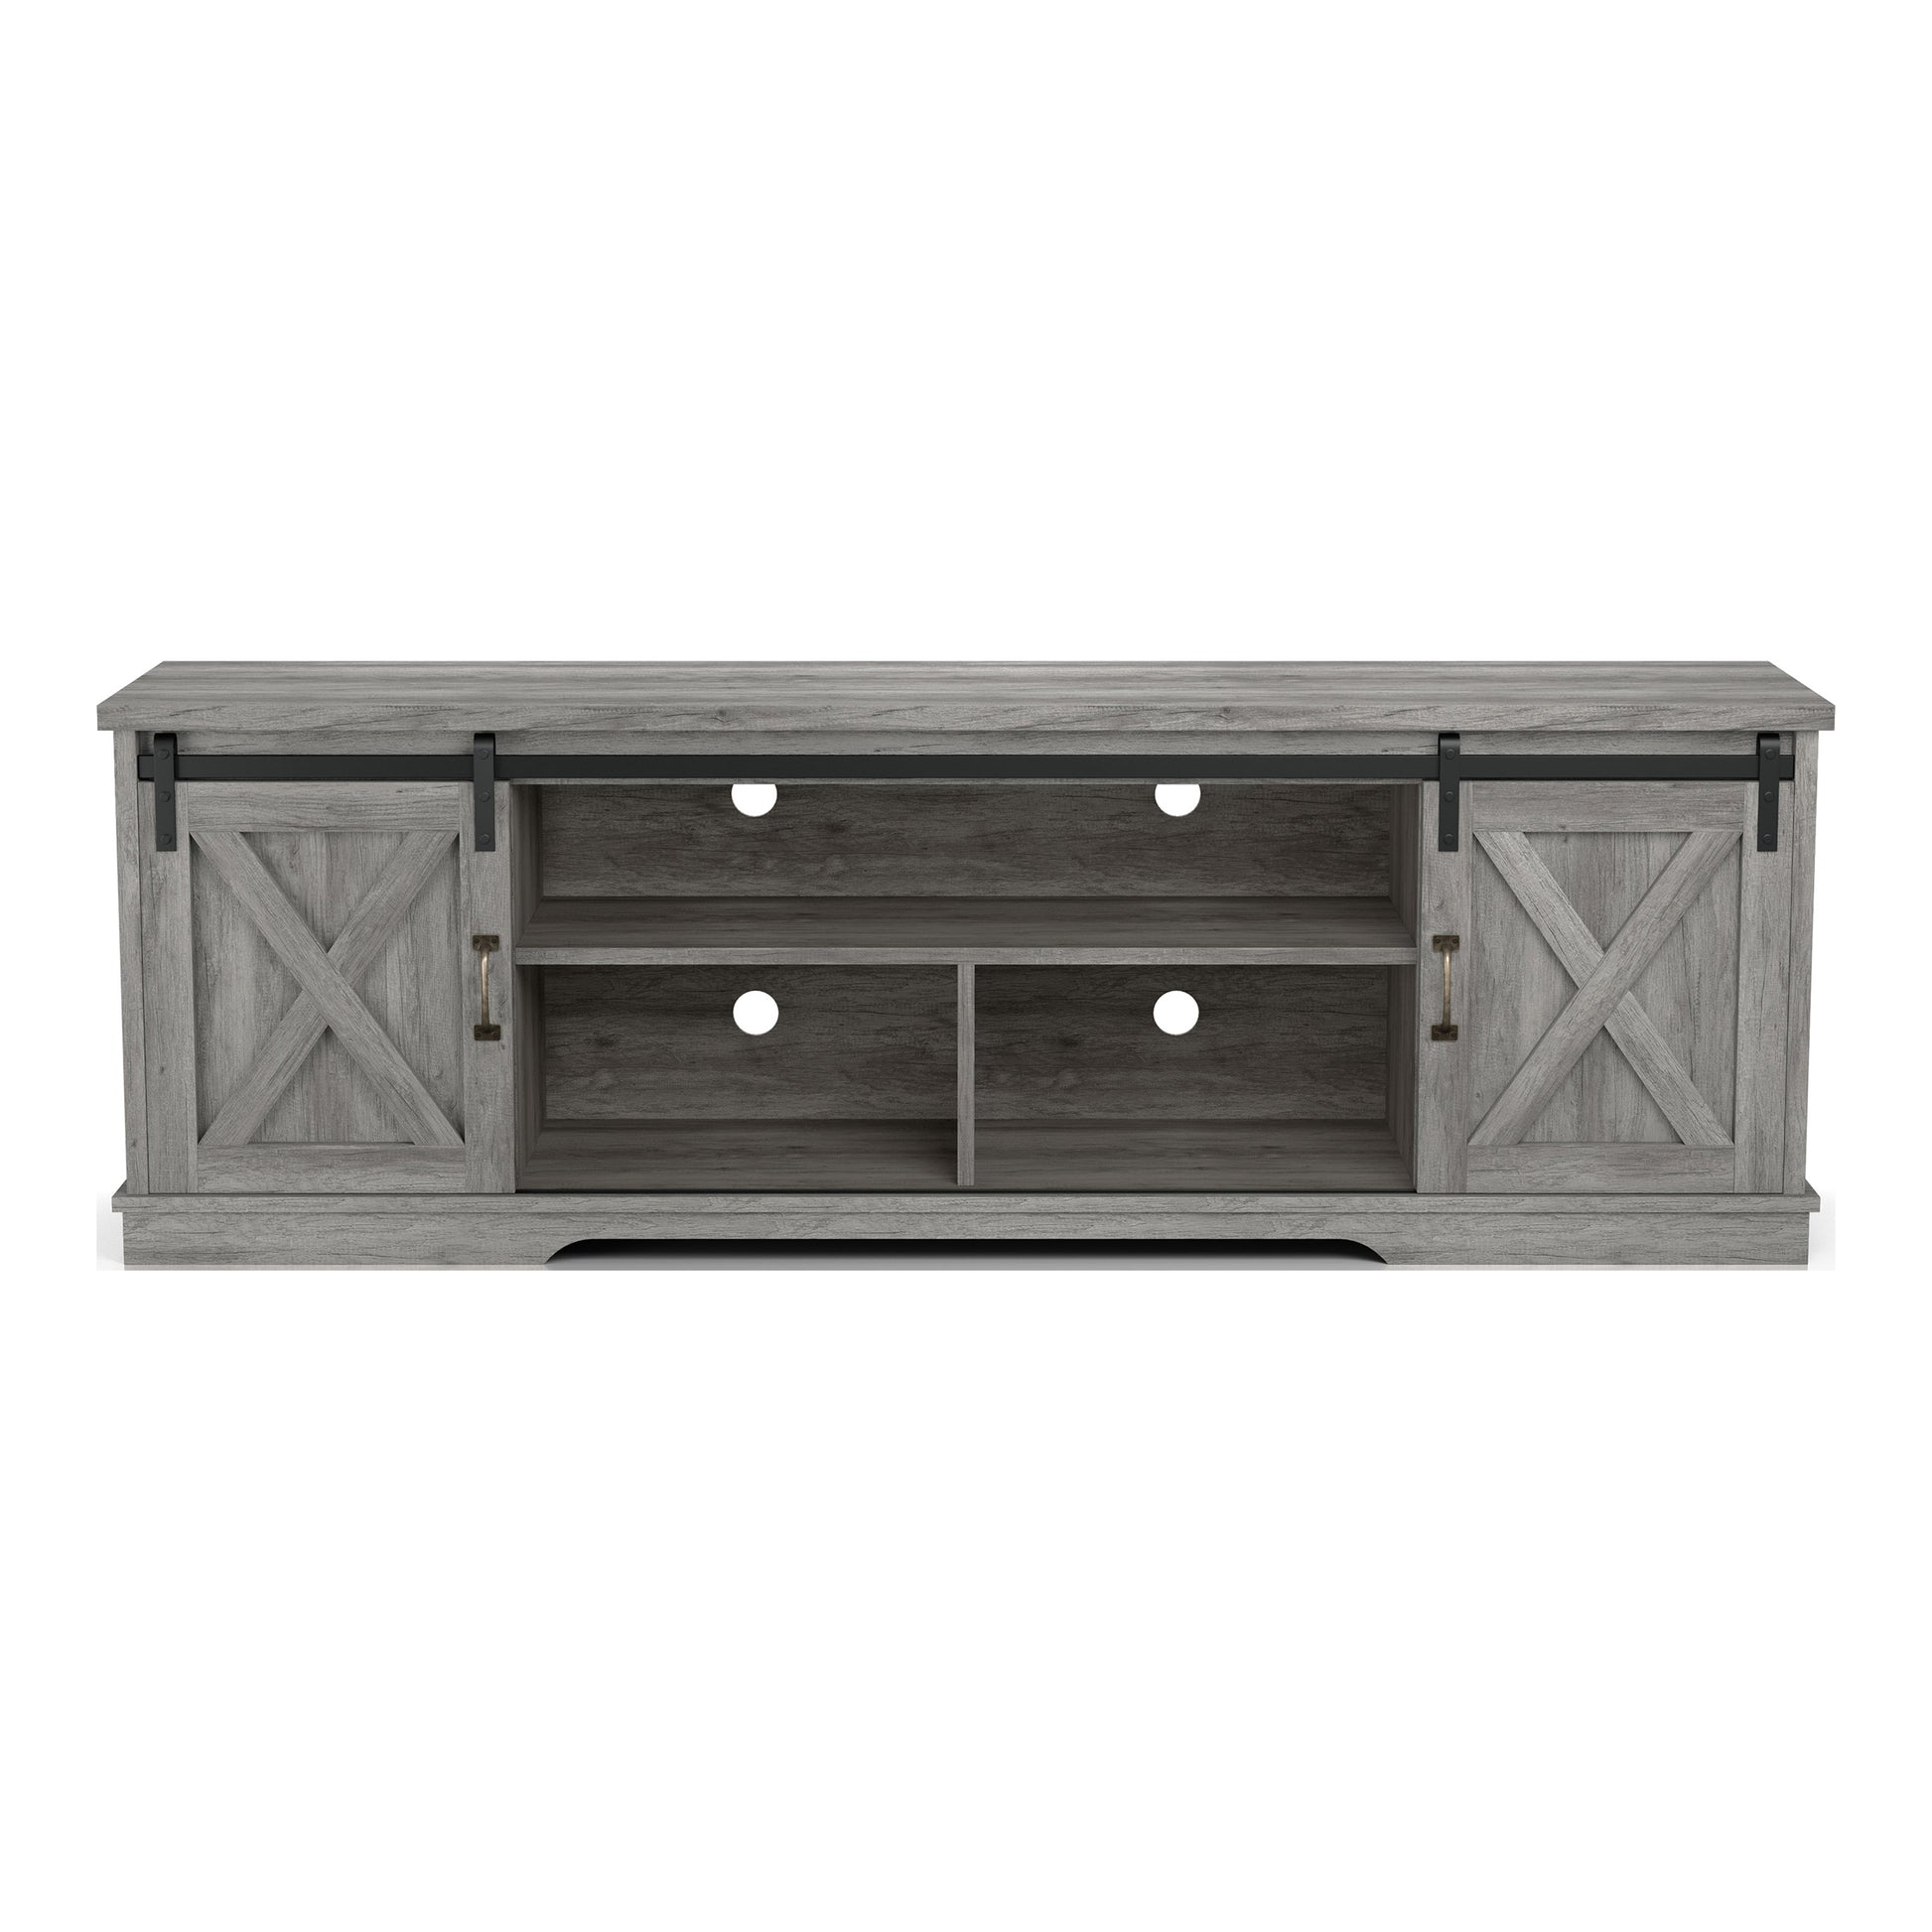 Front-facing rustic vintage gray oak three-shelf two-cabinet TV stand on a white background